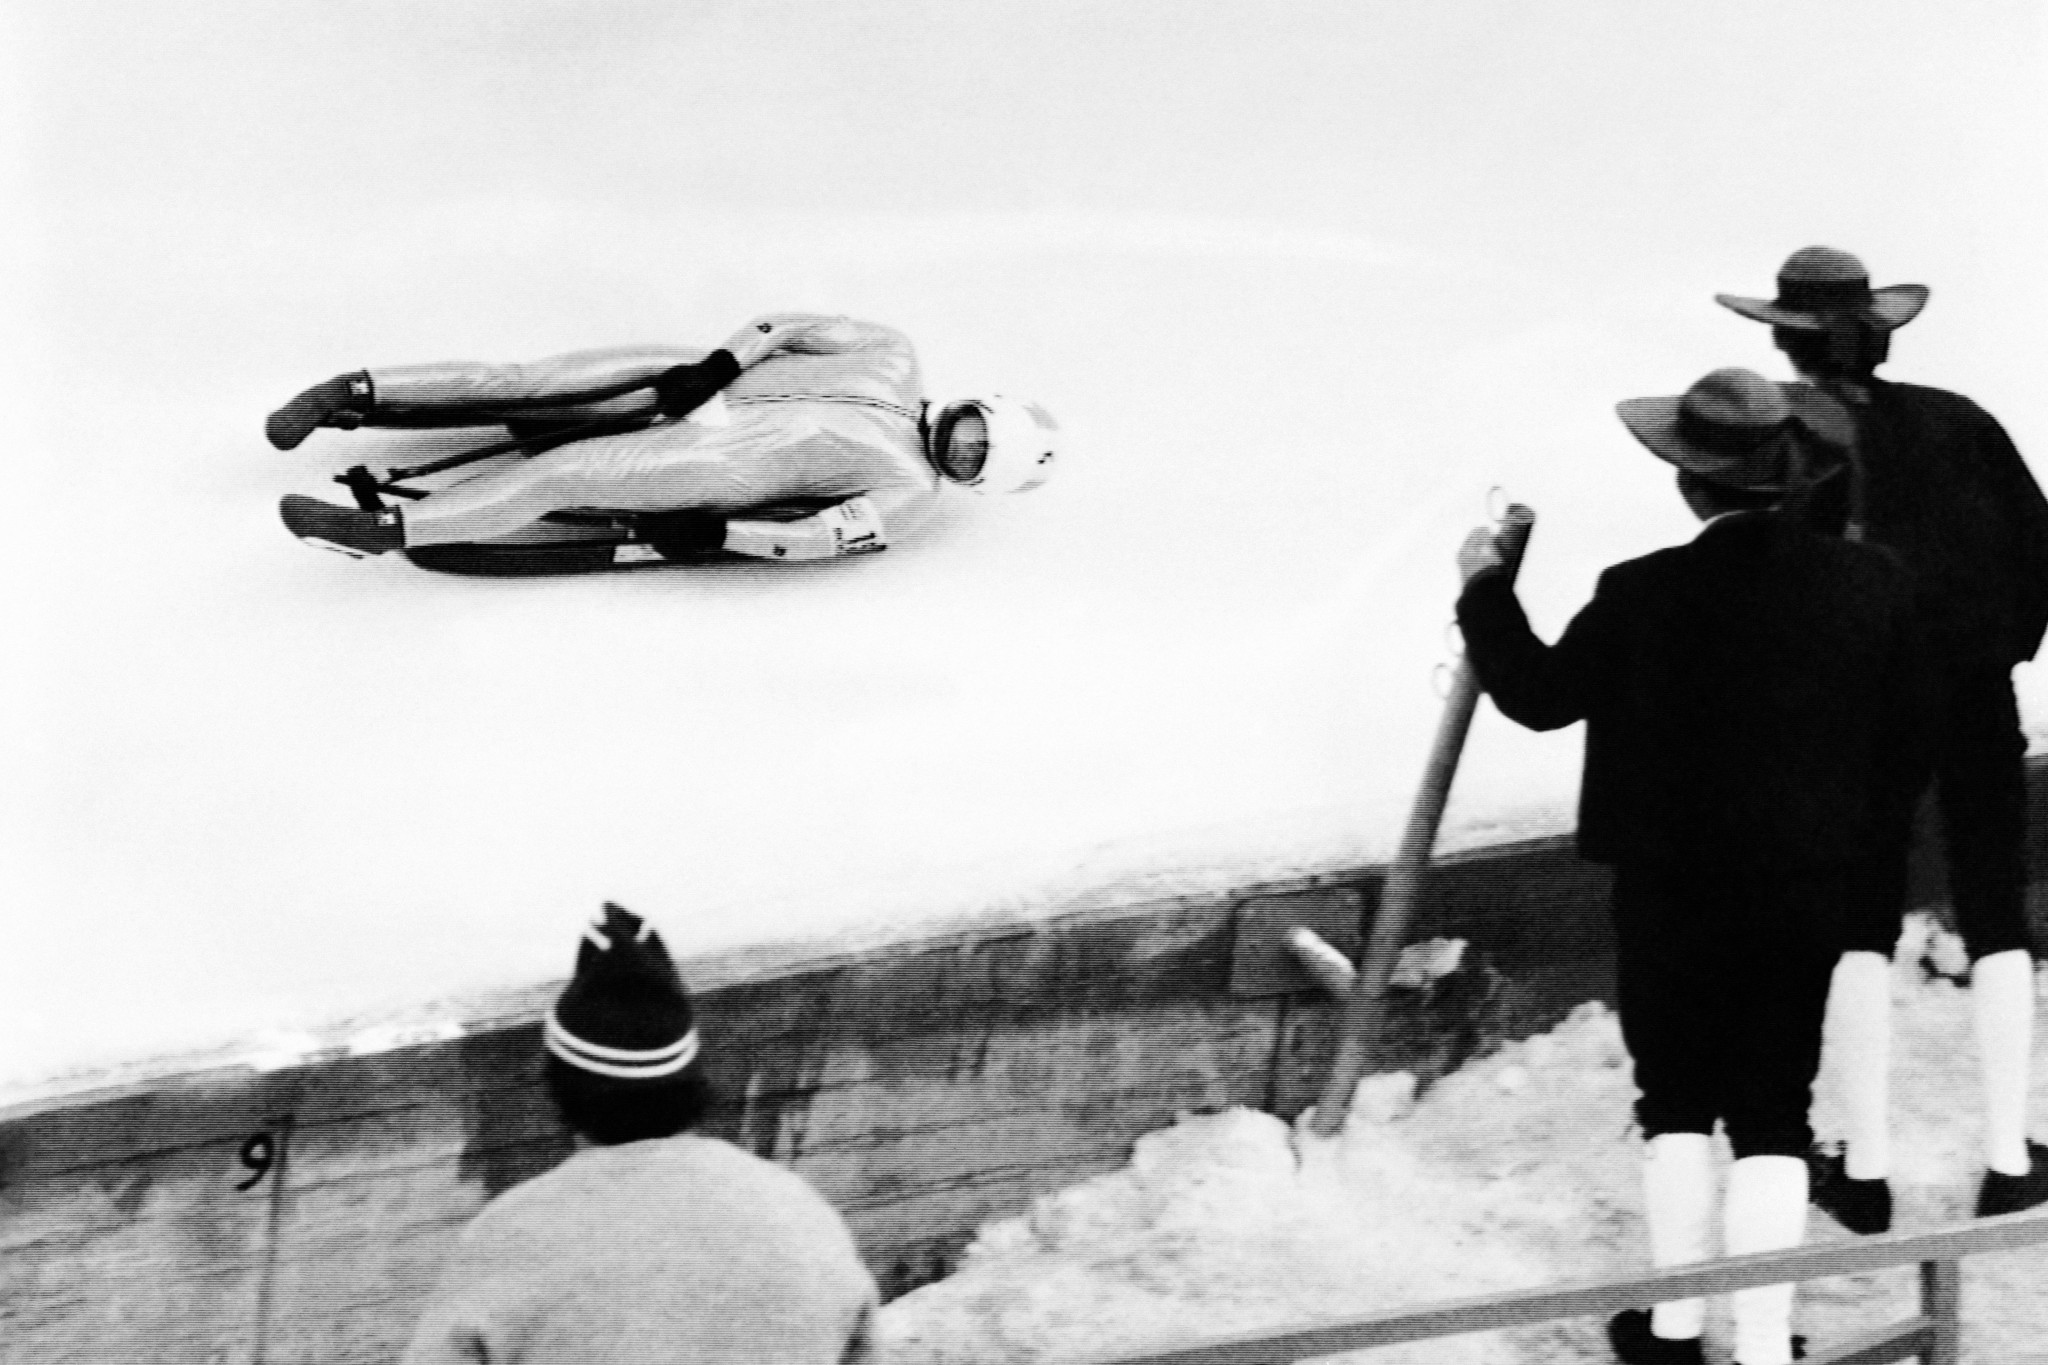 Luge made its Olympic debut at Innsbruck 1964 ©Getty Images